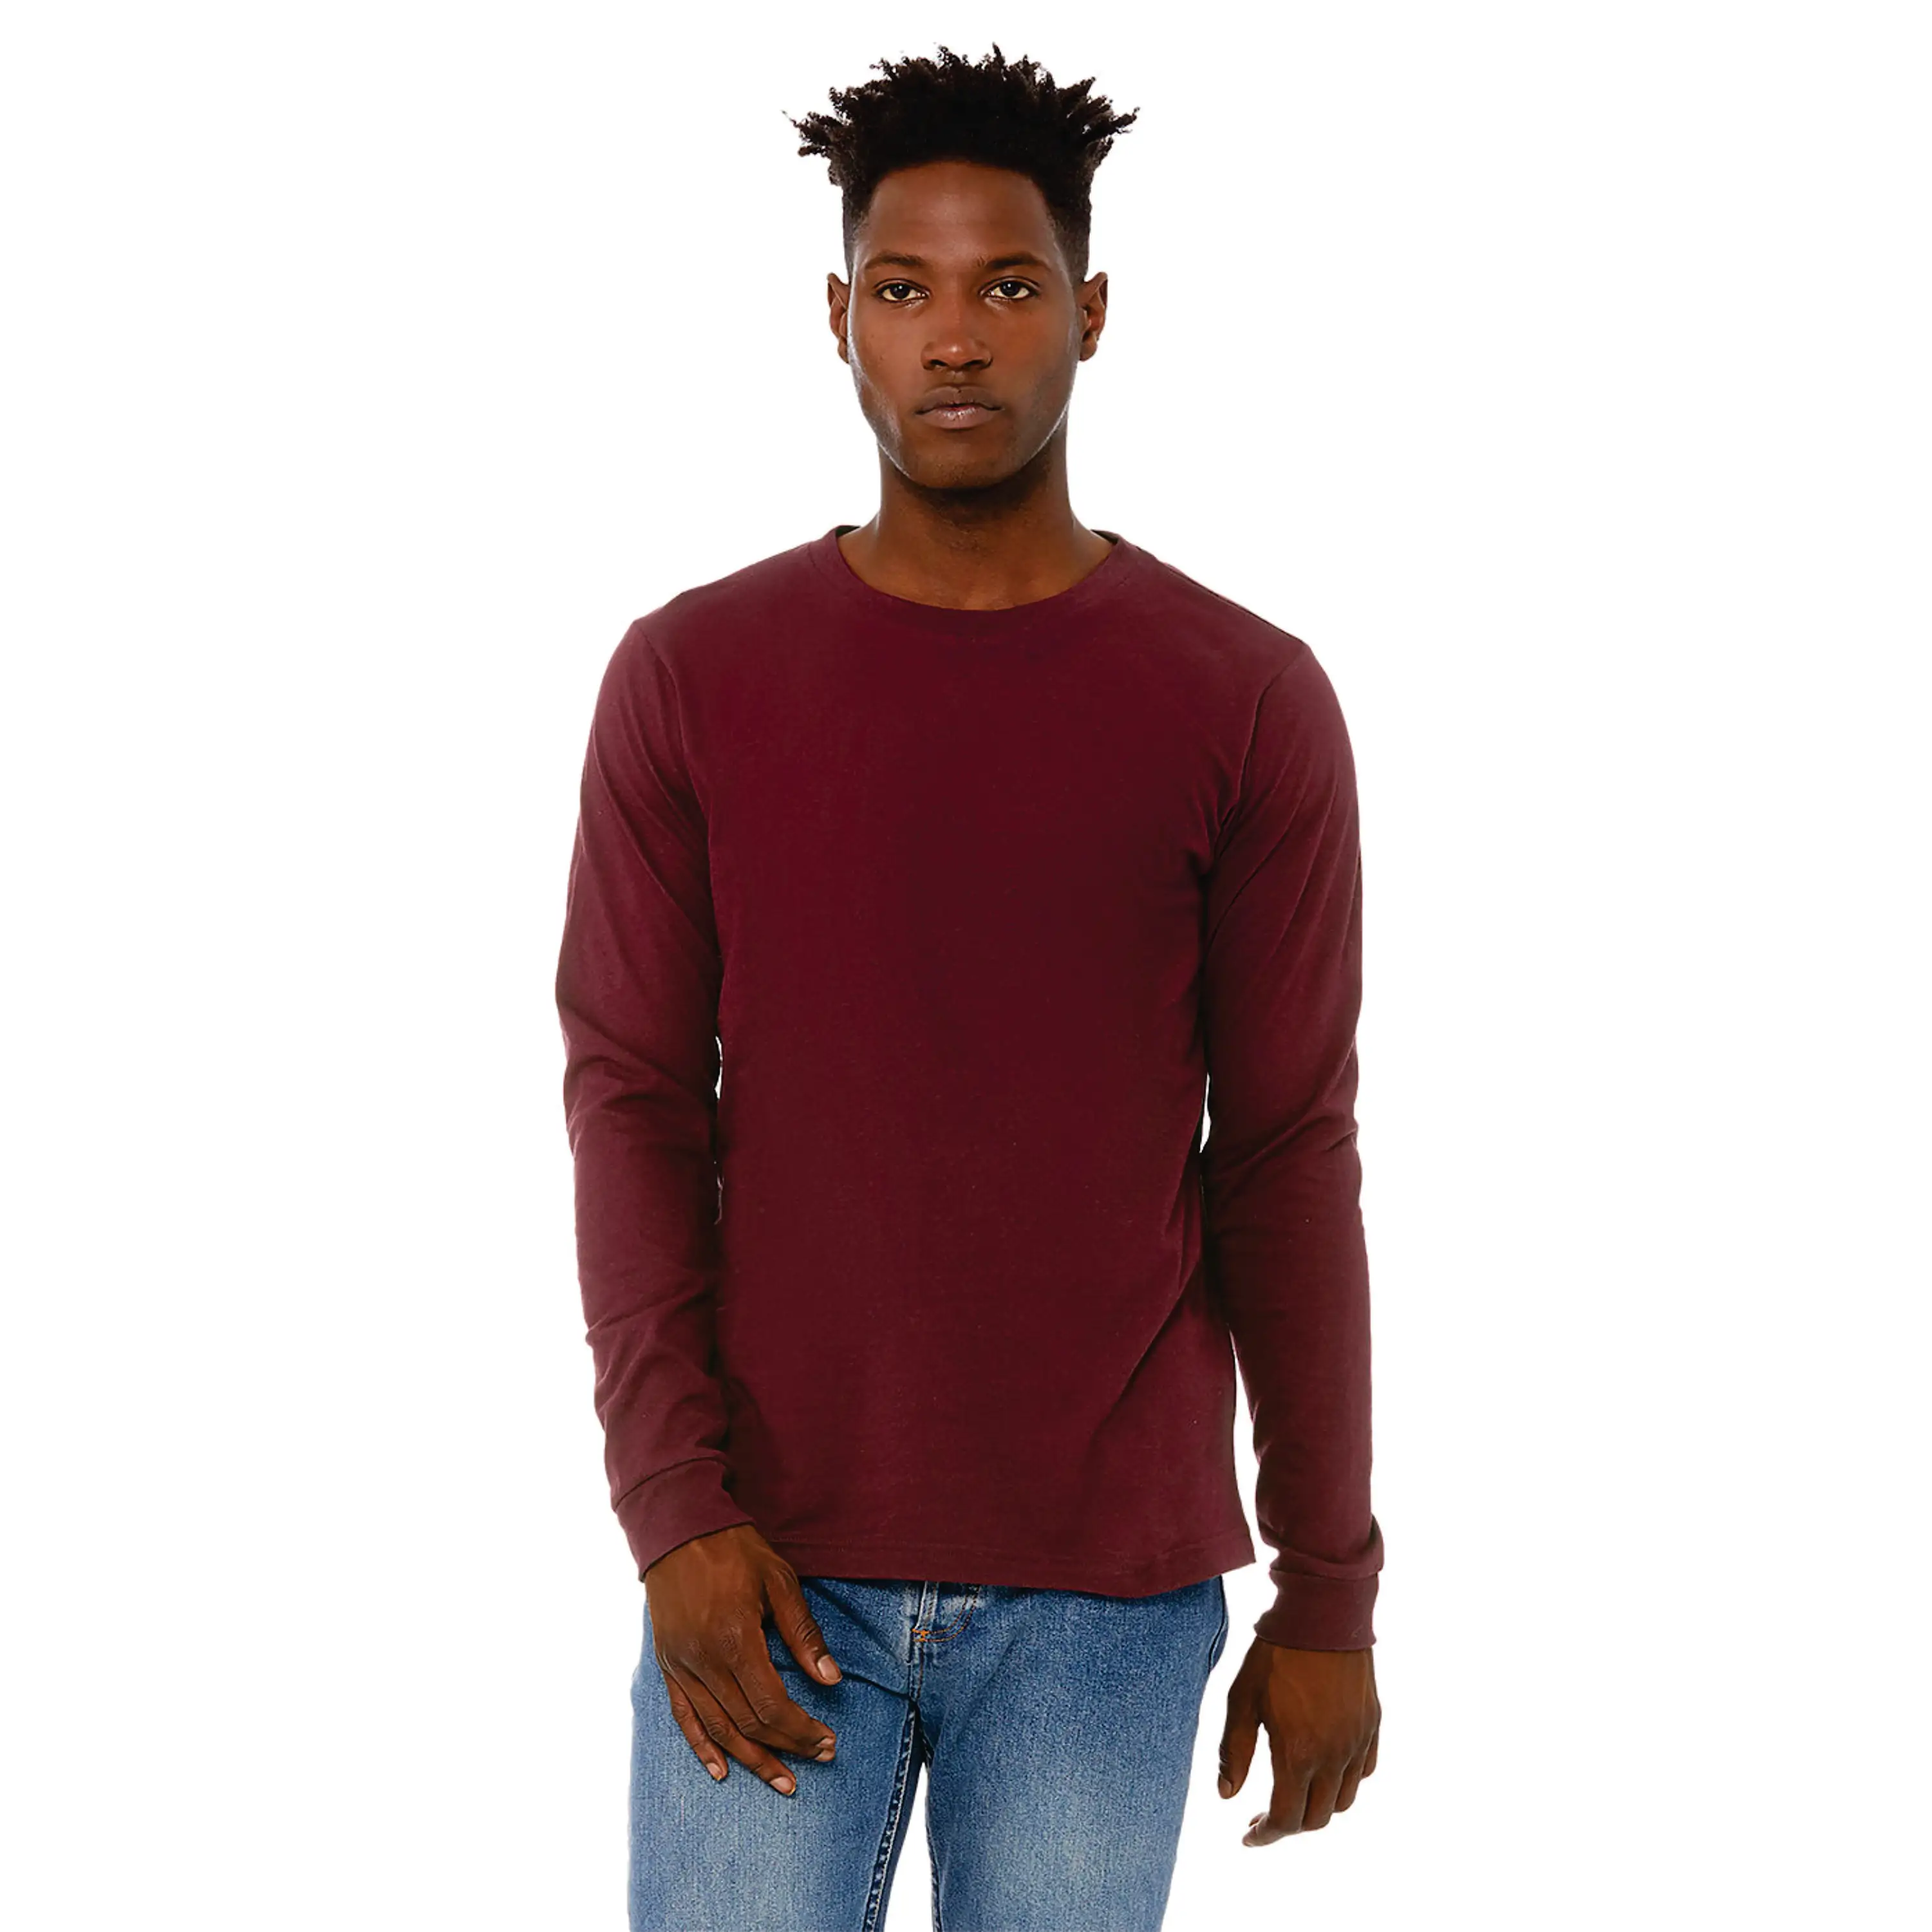 100% Airlume Combed and Ring Spun Cotton 32 Single 4.2 oz Maroon Classic Crew Neck Unisex Jersey Long Sleeves T-Shirt